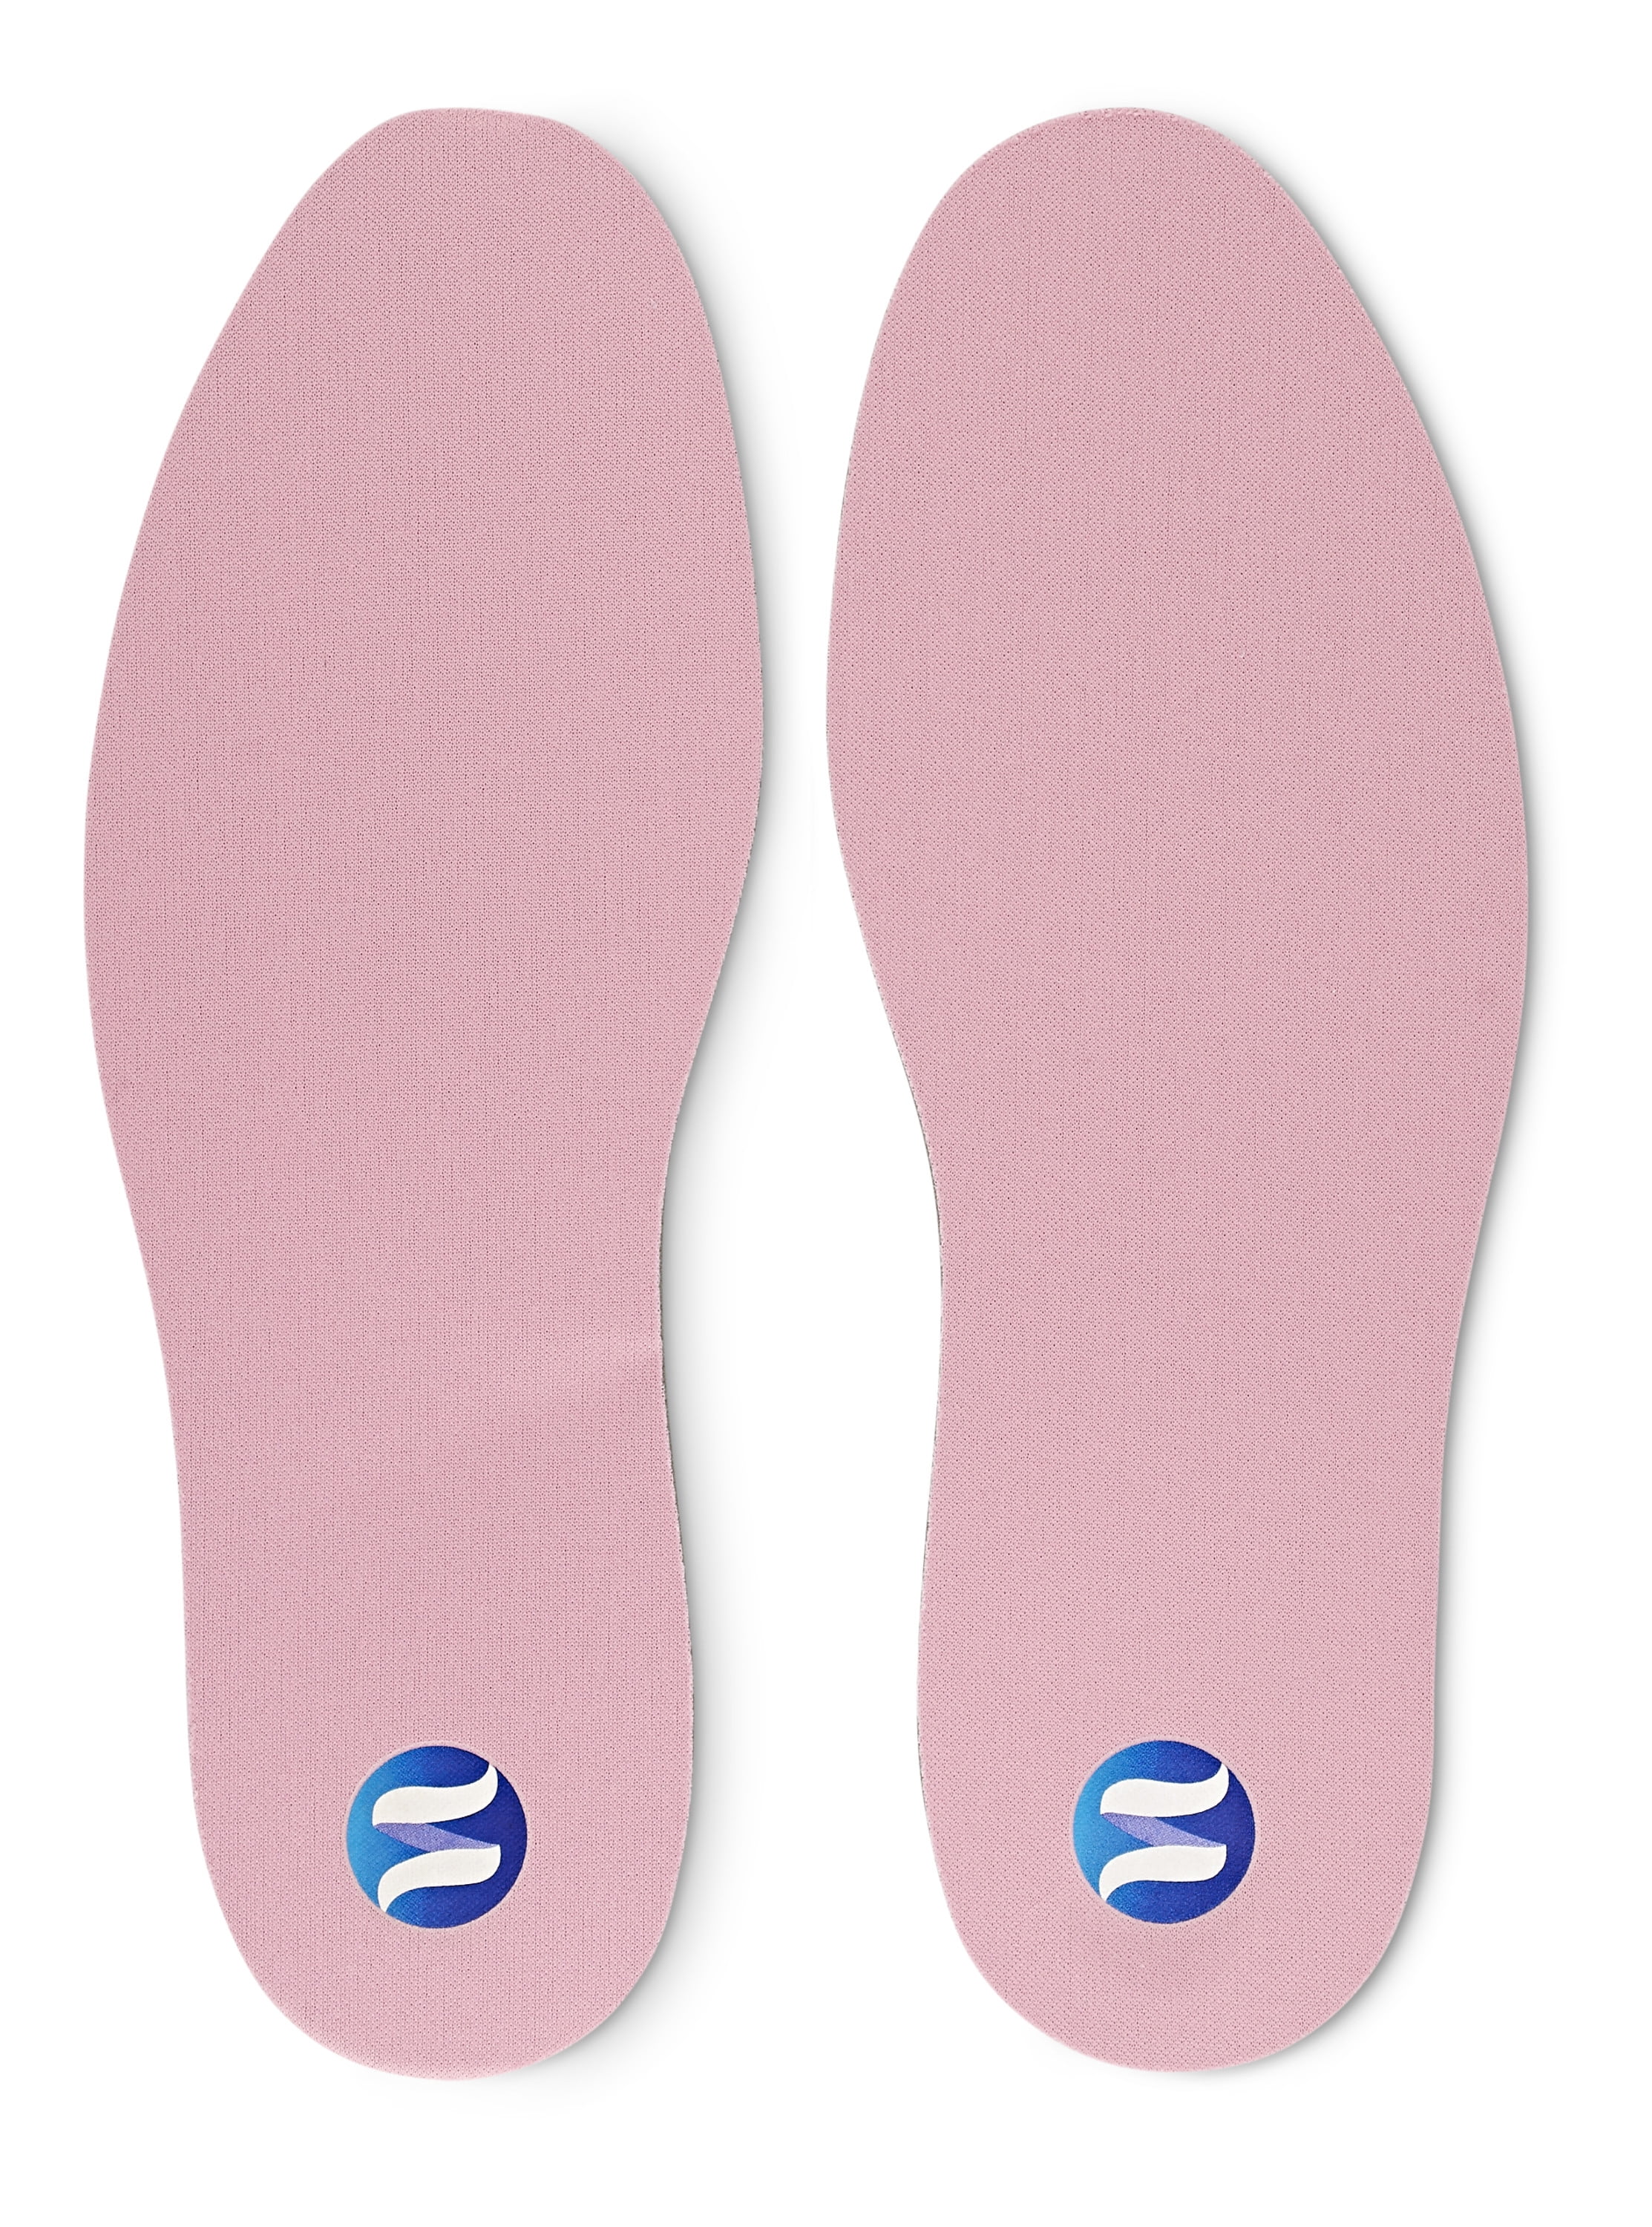 memory foam footbed shoes